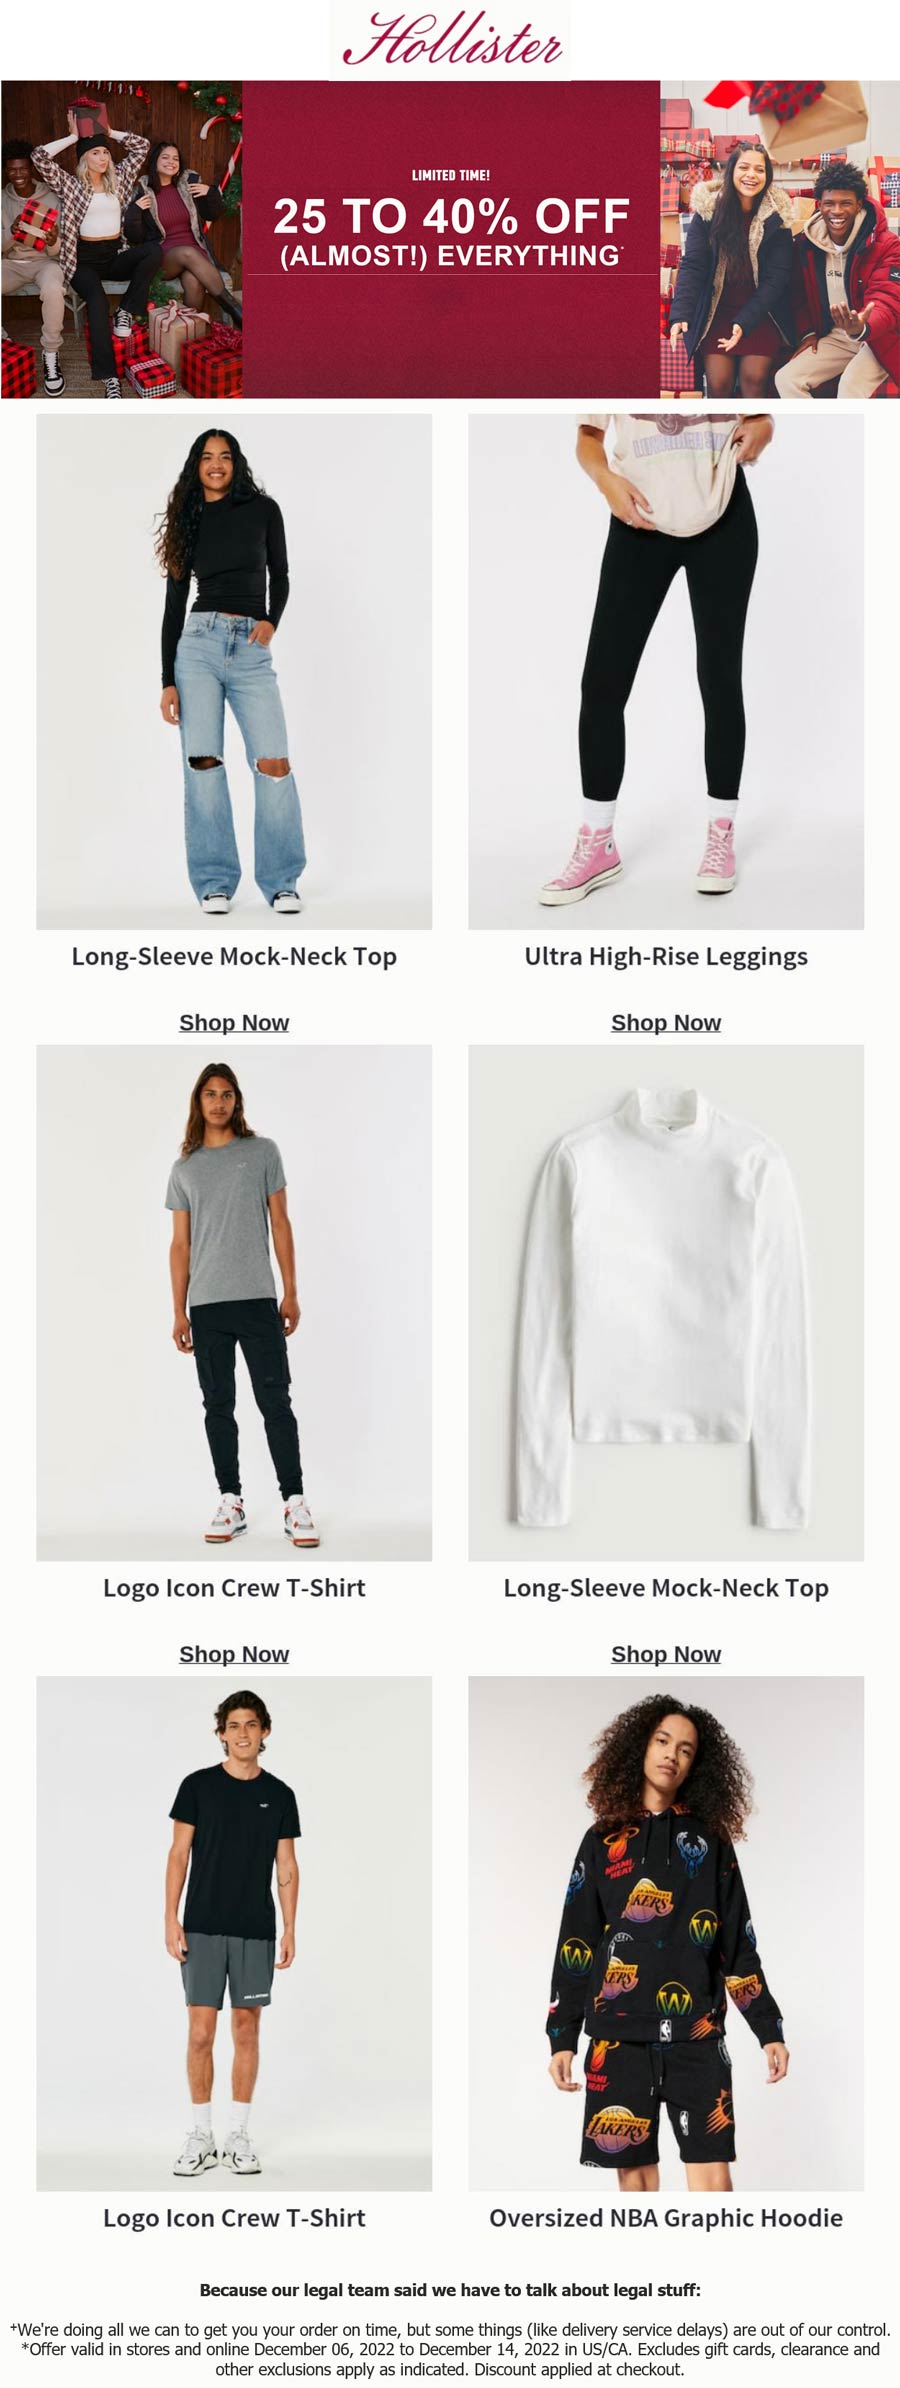 Hollister stores Coupon  25-40% off everything at Hollister #hollister 